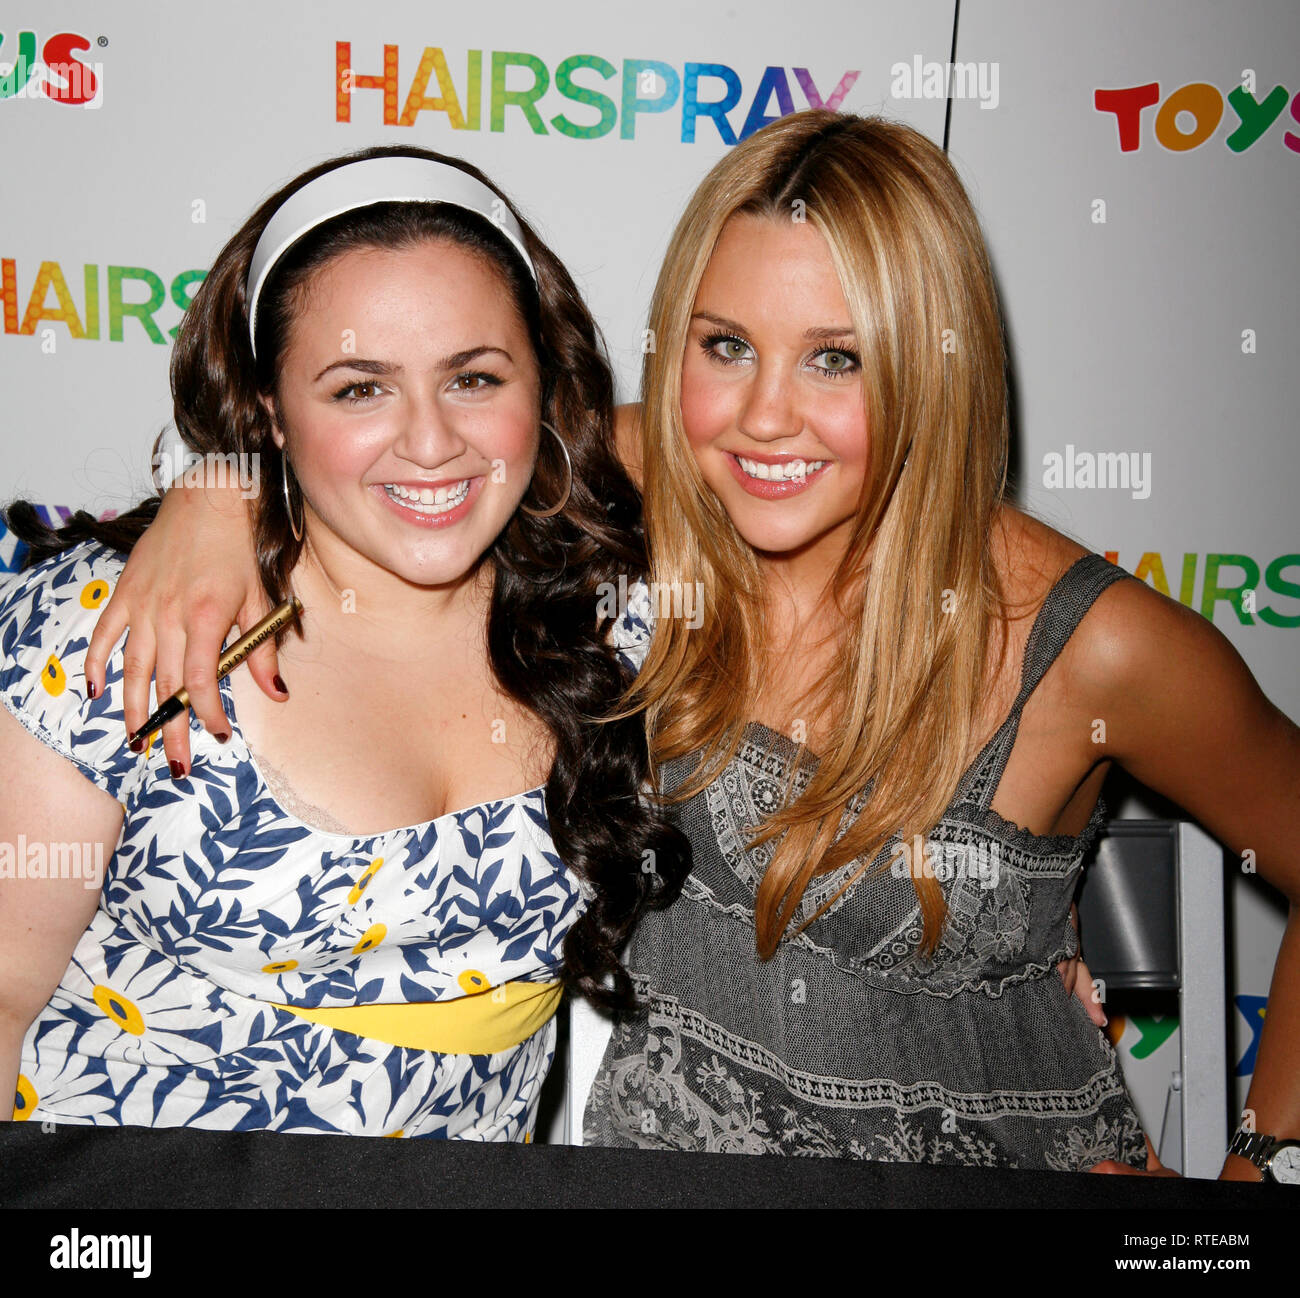 ***FILE PHOTO*** Amanda Bynes Returns To Mental Health Facility After Relapse. of the 'HAIRSPRAY' movie cast helps raise the curtain on the new Doll Line at Toys 'R' Us in Times Square, New York City. July 17, 2007 Credit: Walter McBride/MediaPunch Stock Photo